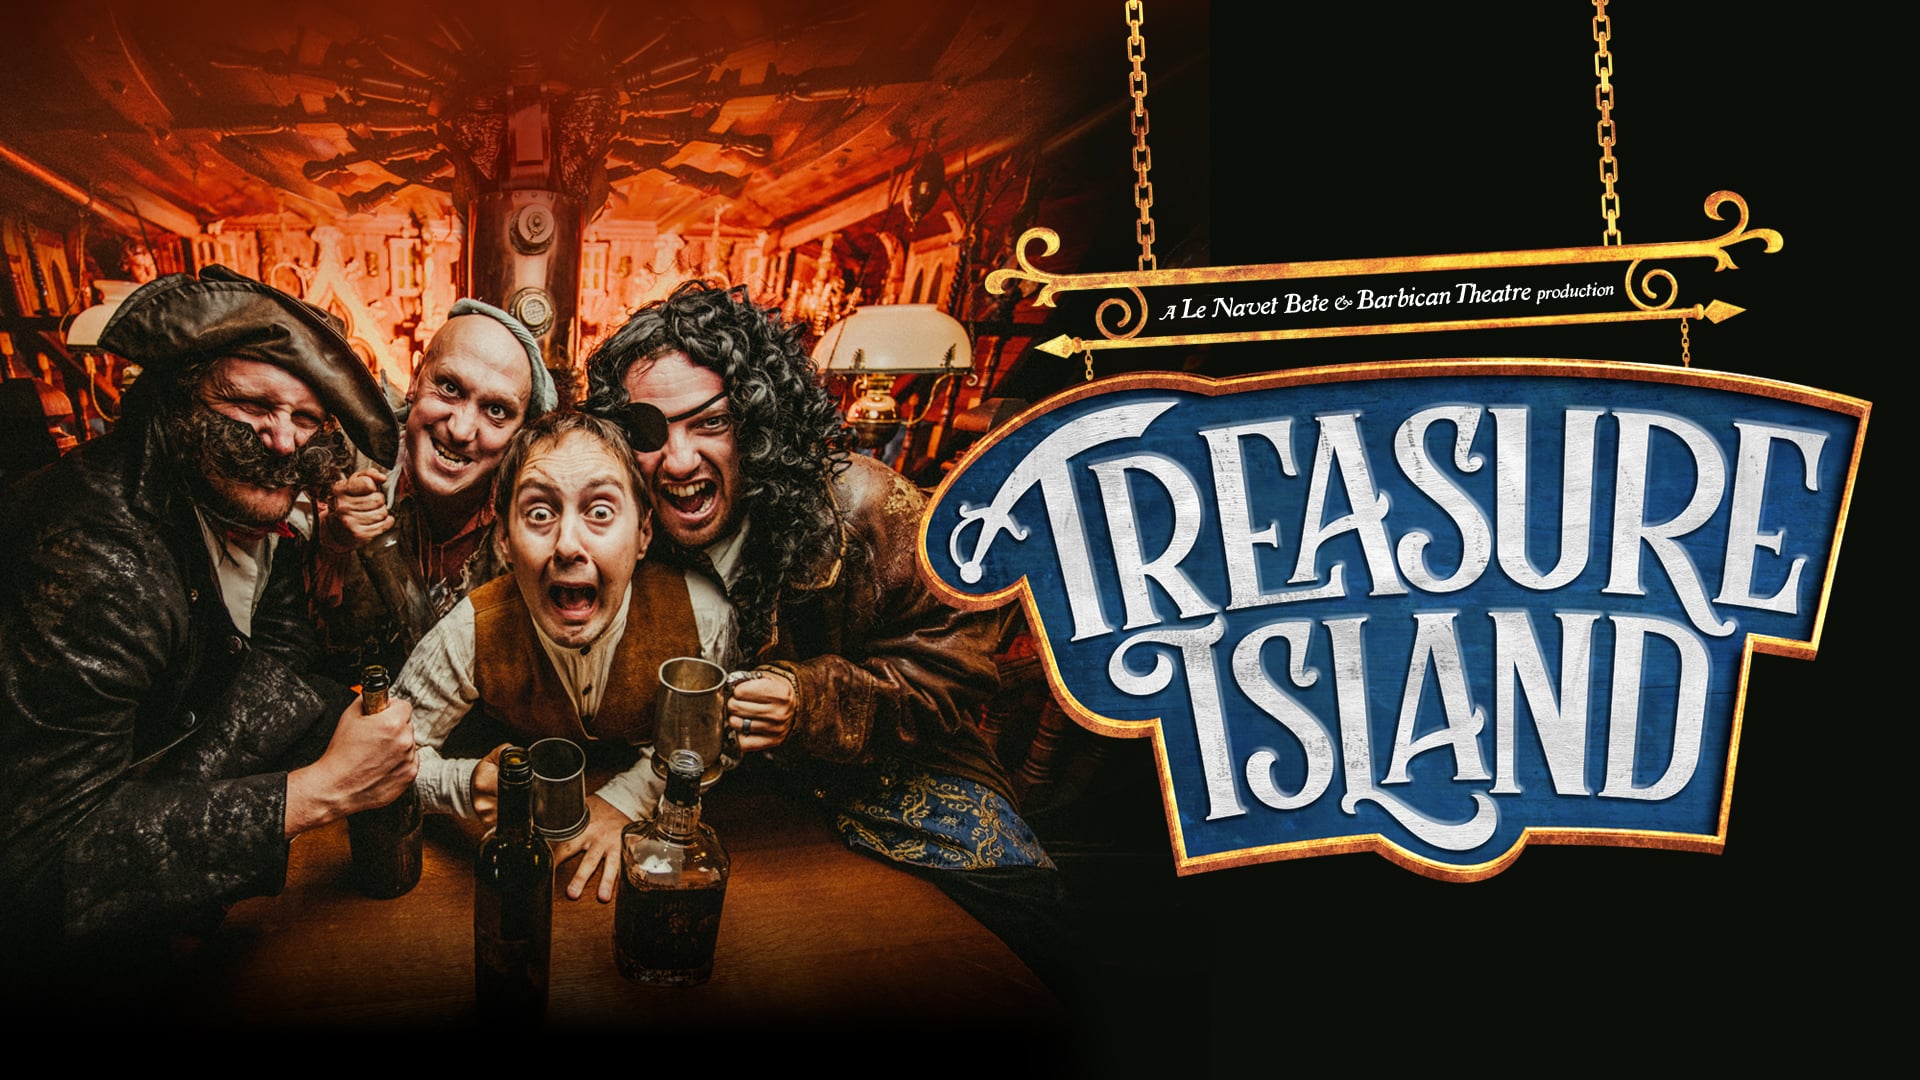 Treasure Island promotional artwork - 4 actors in period costume in a tavern, leaning in with very piratey expressions!